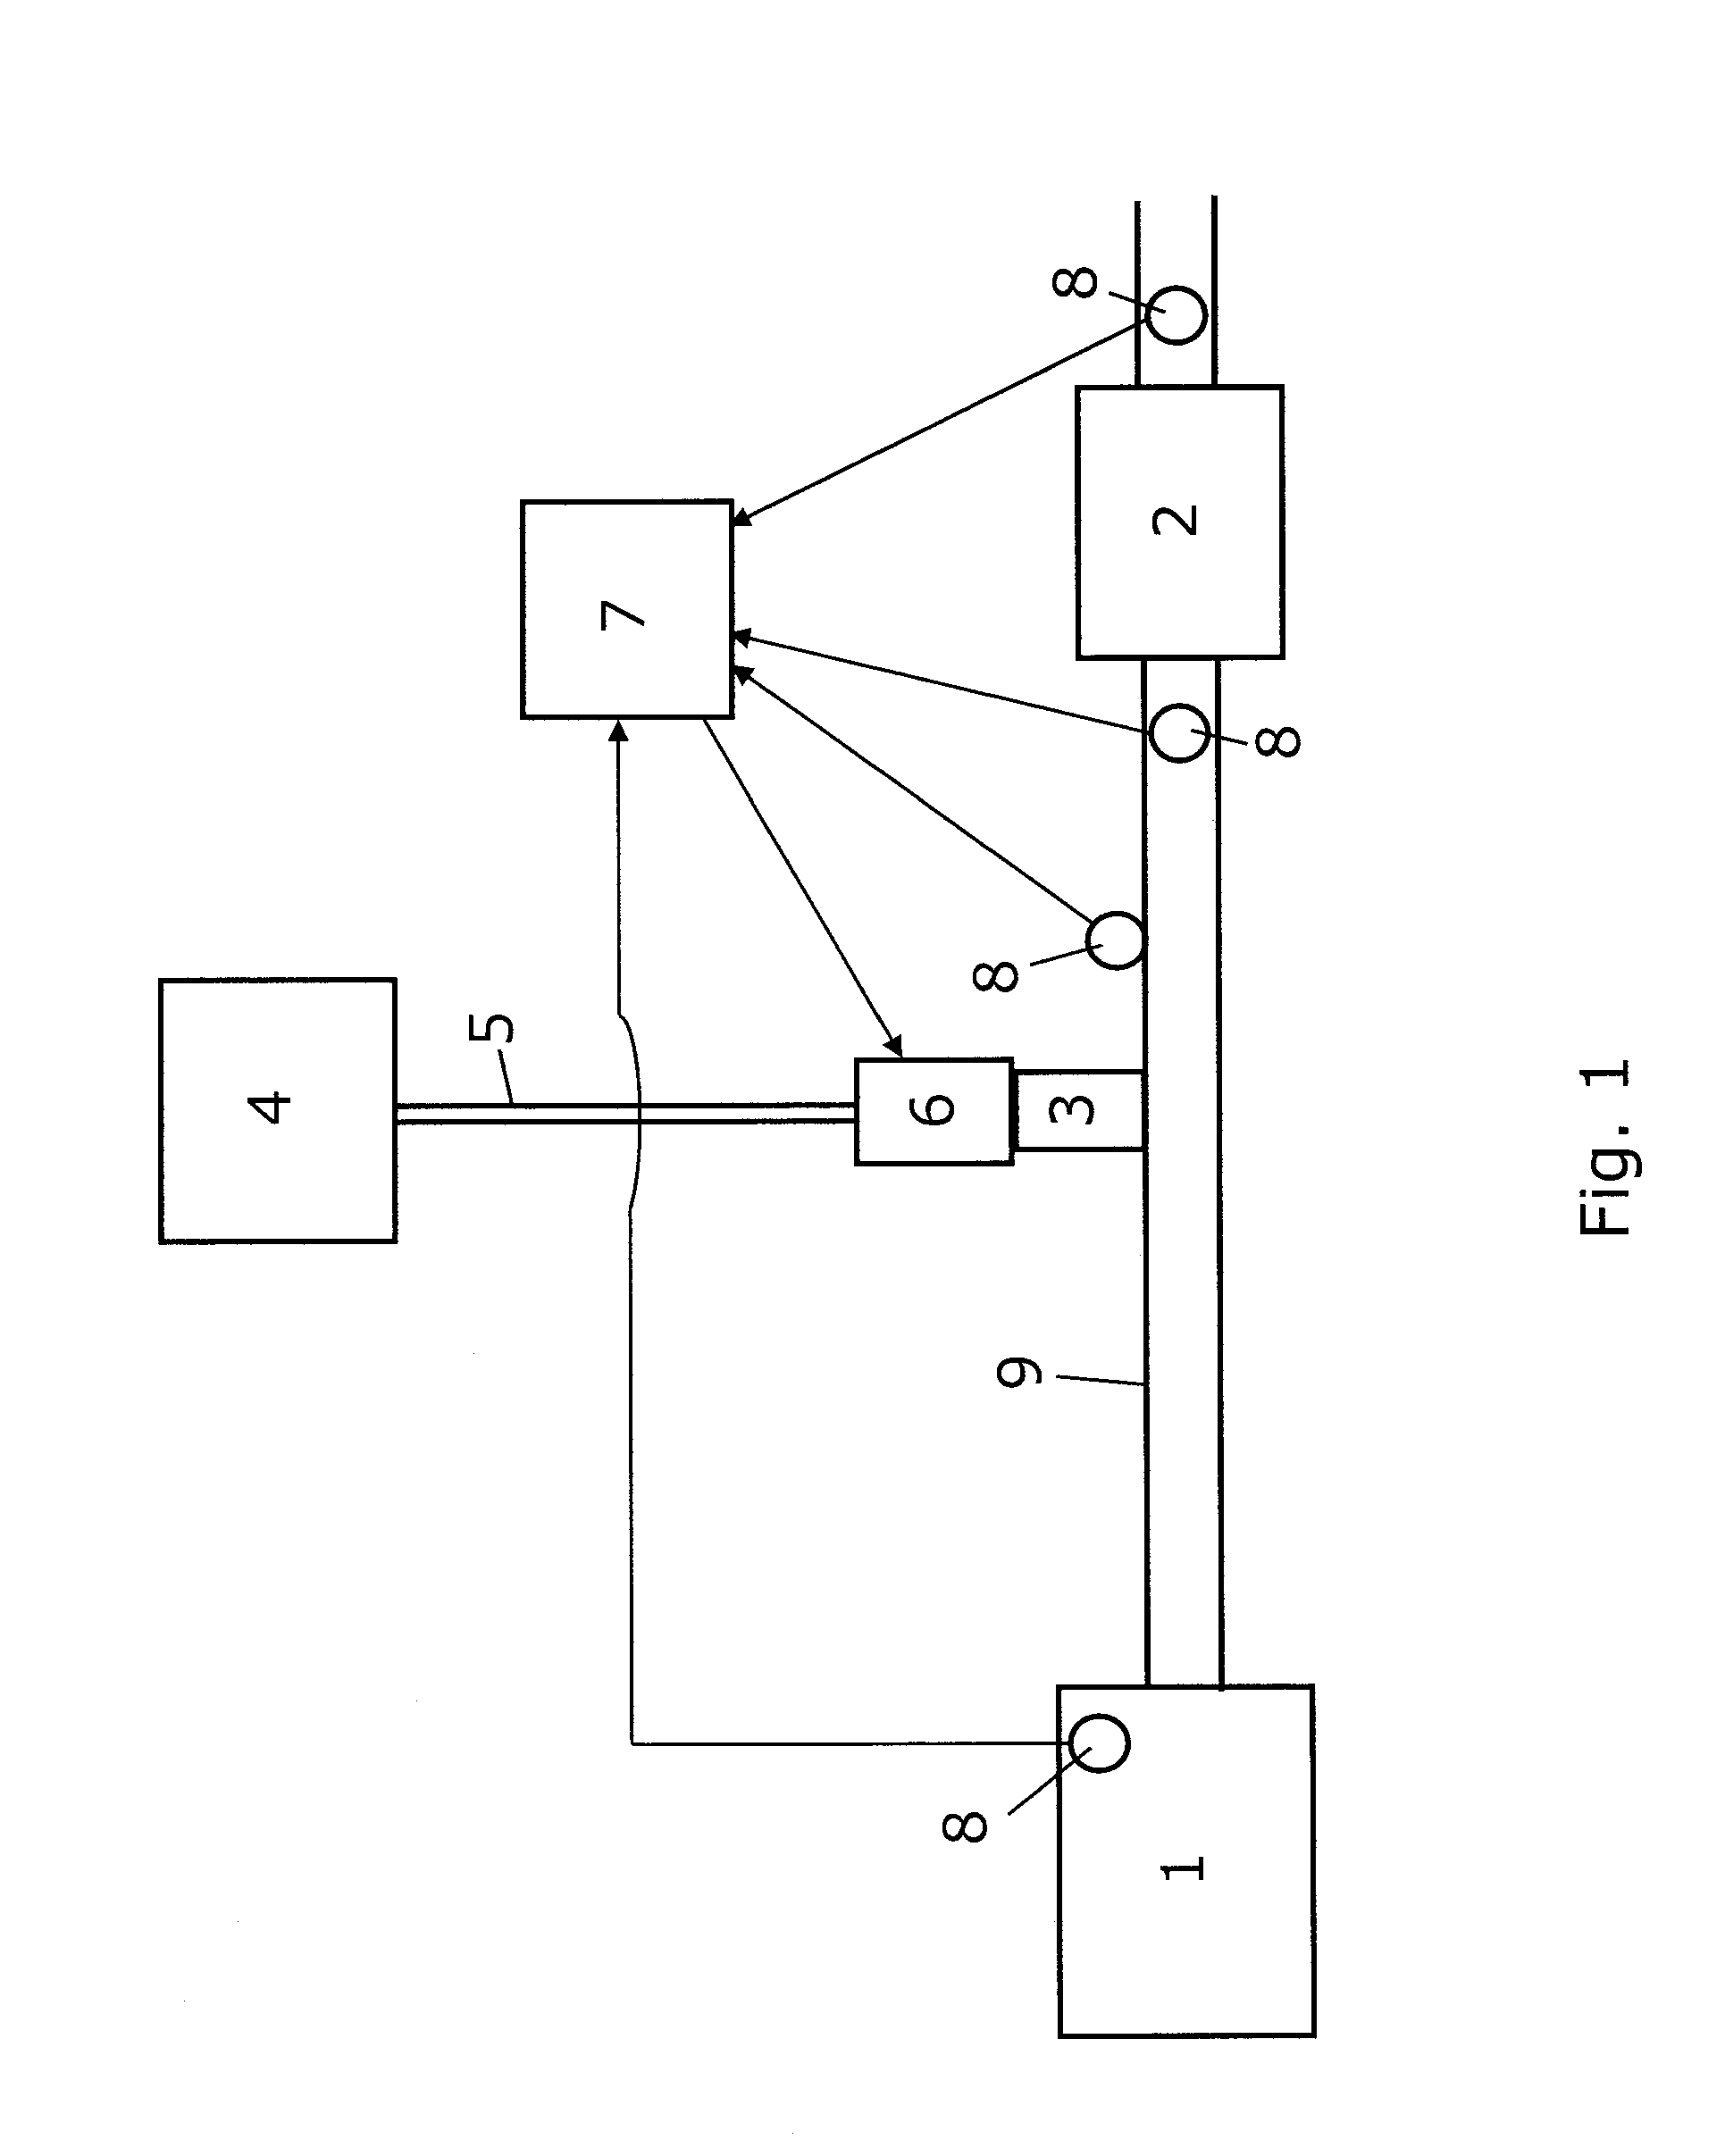 Dosing system for use in an exhaust system of a combustion engine